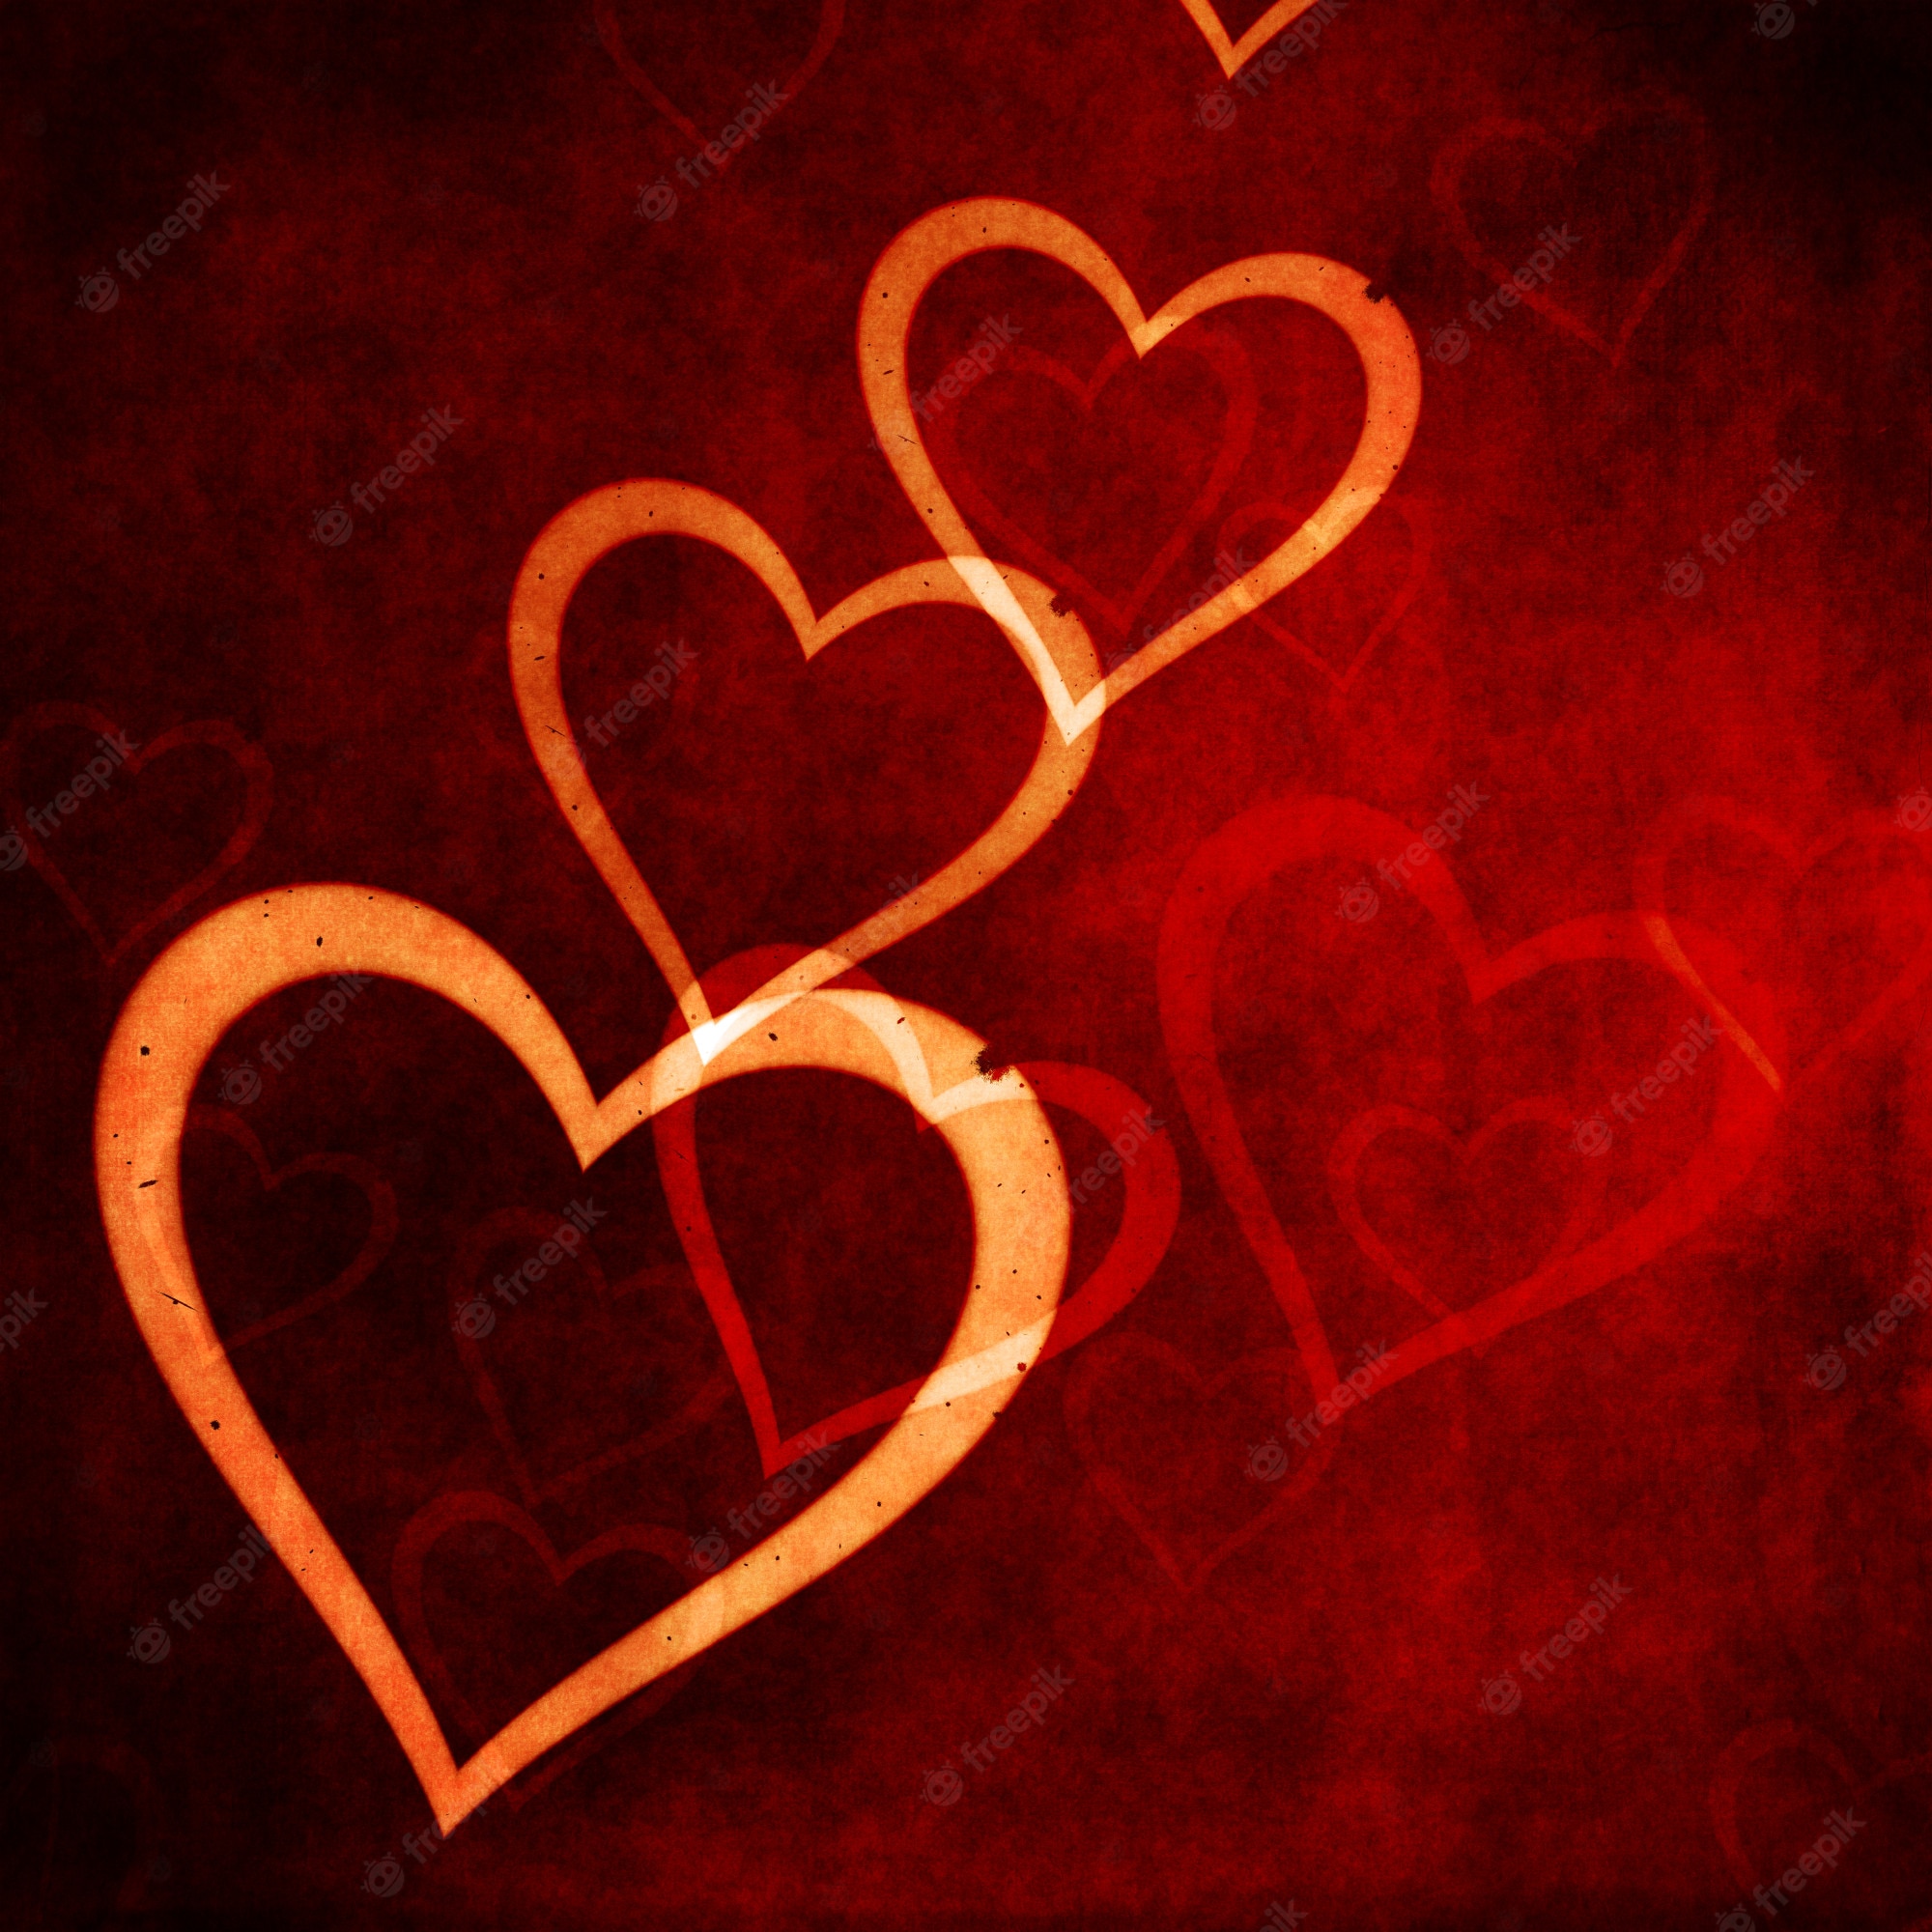 Free Photo. Valentine's day background with grunge style hearts design